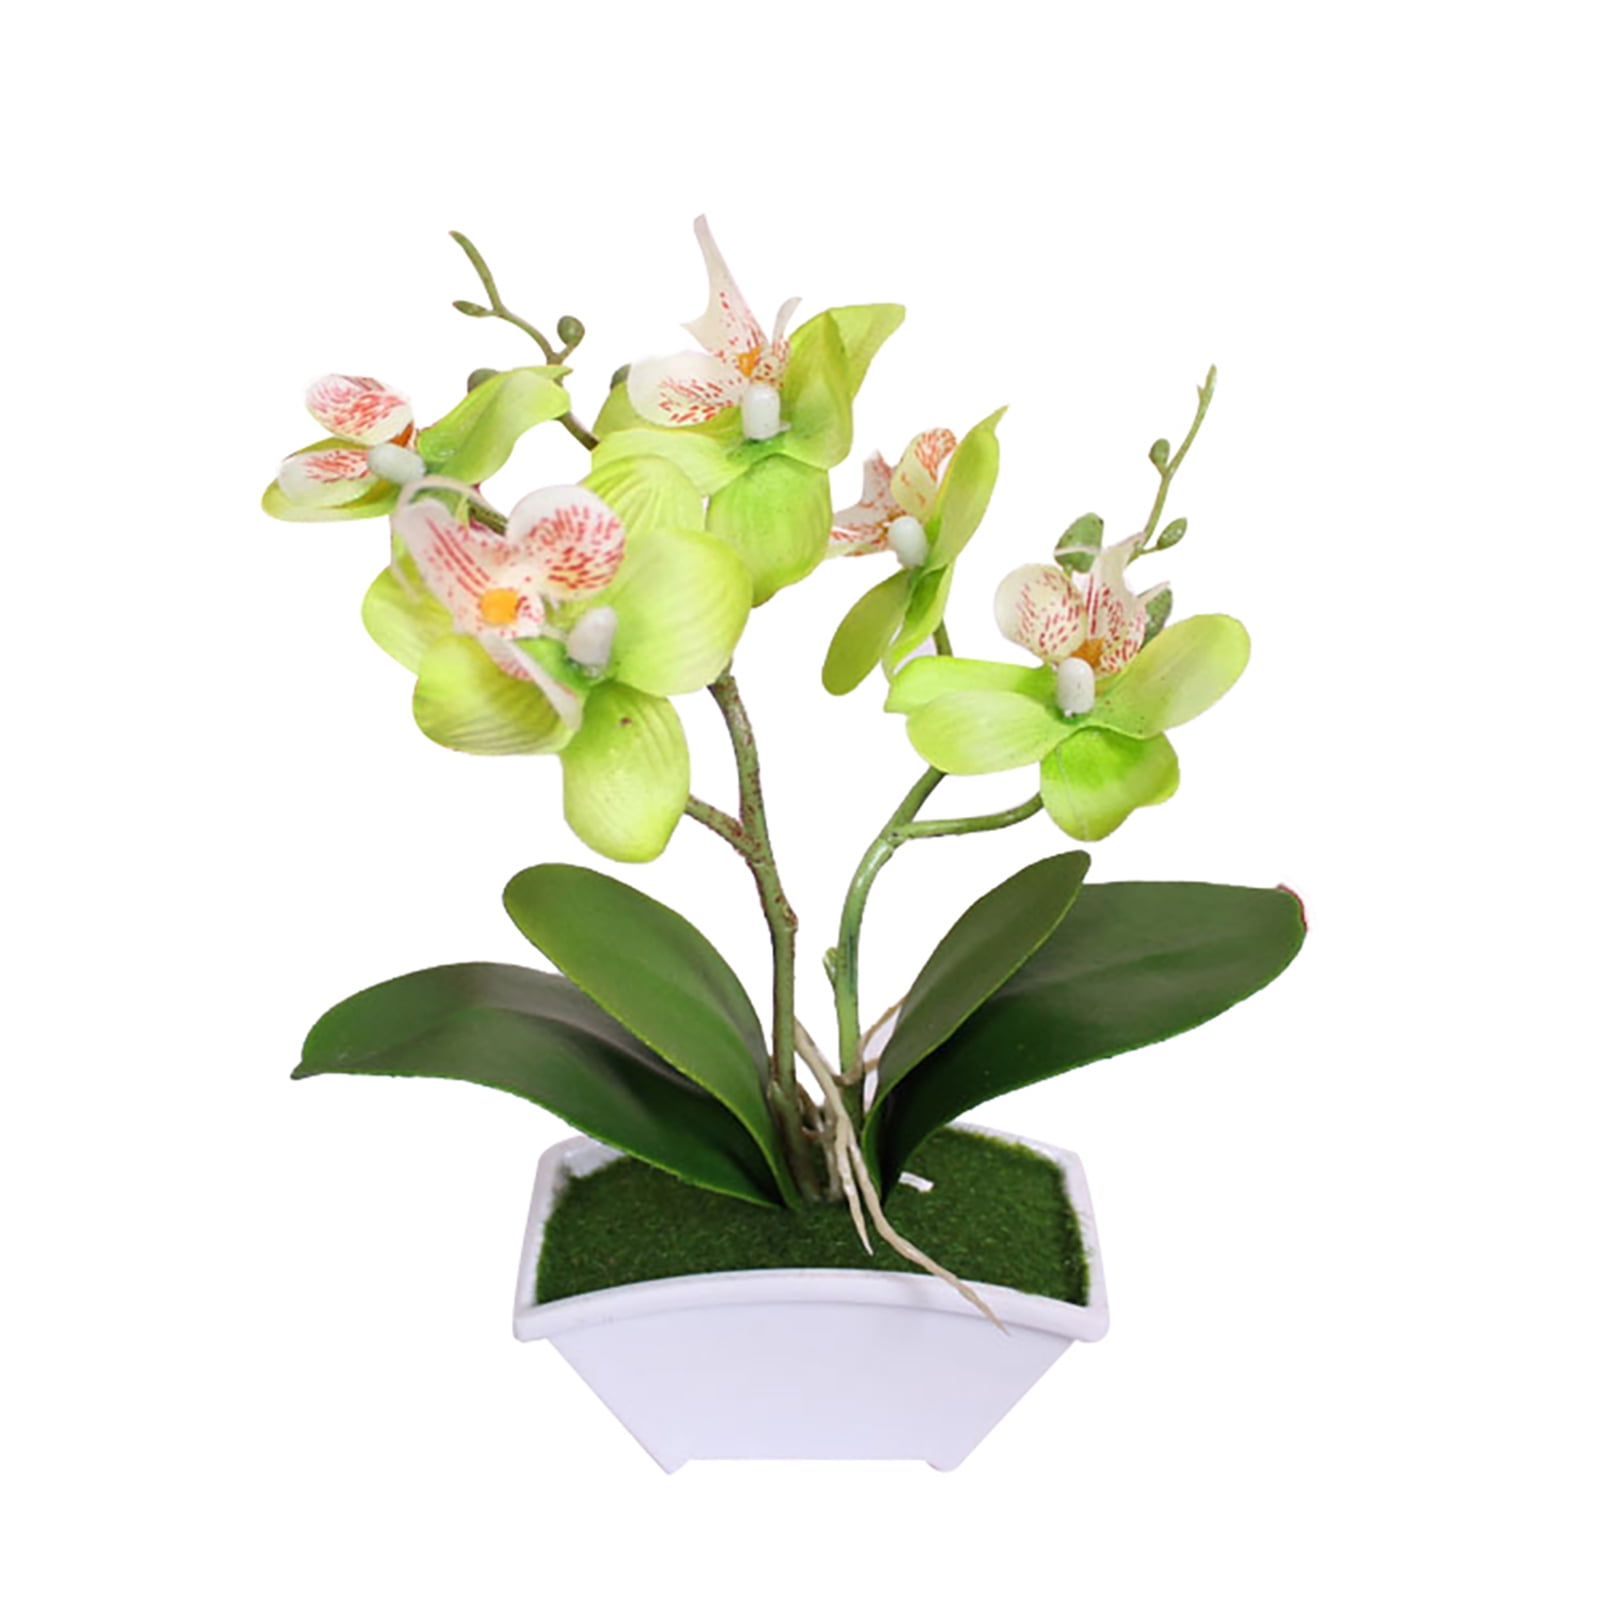 Details about   Home Artificial Butterfly Wedding Plants Orchid Flower Fake in Party Decor 